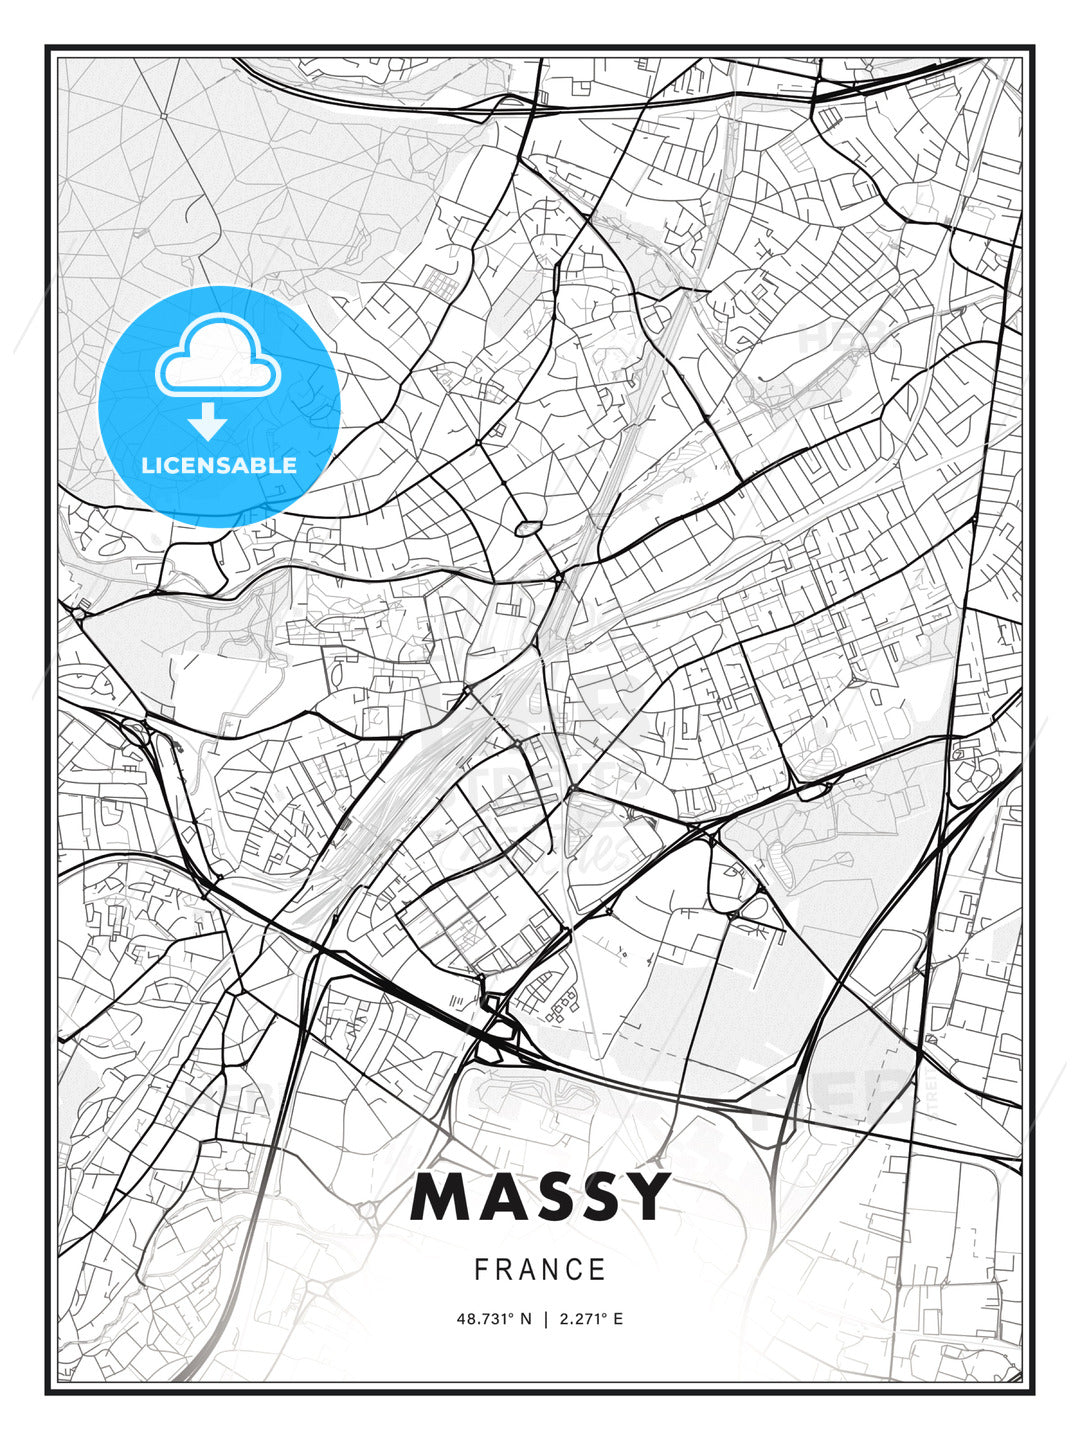 Massy, France, Modern Print Template in Various Formats - HEBSTREITS Sketches